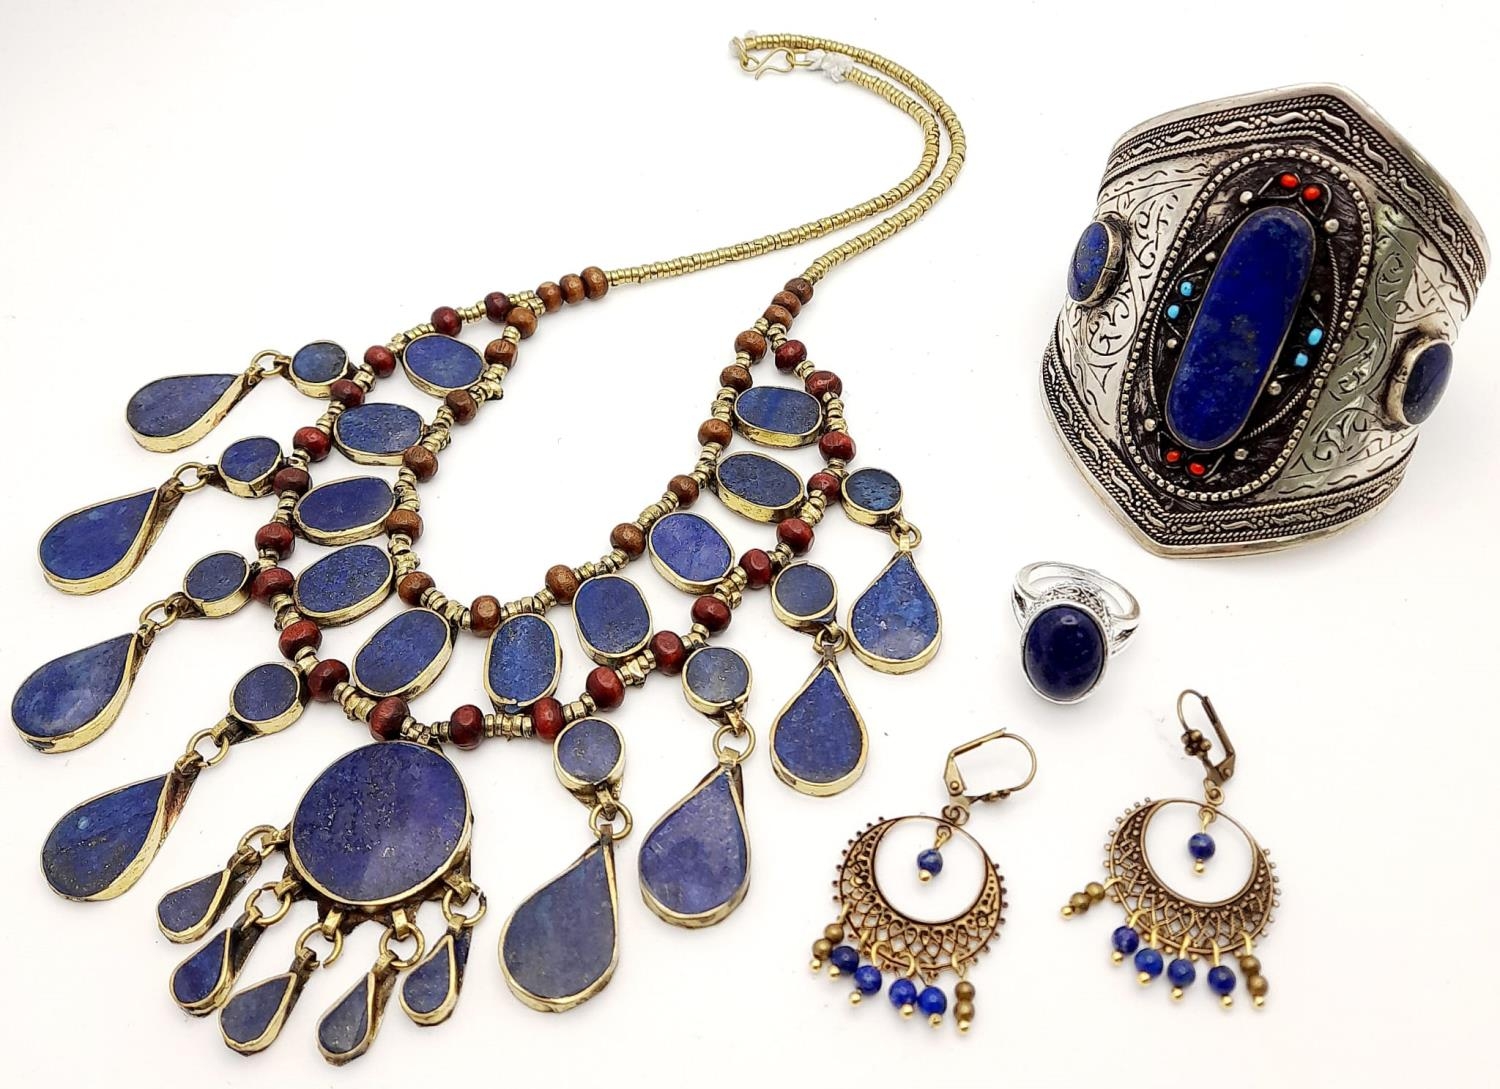 A Lapis Lazuli Jewellery Suite Comprising of: Cuff bracelet, ring - N, earrings and necklace - 44cm